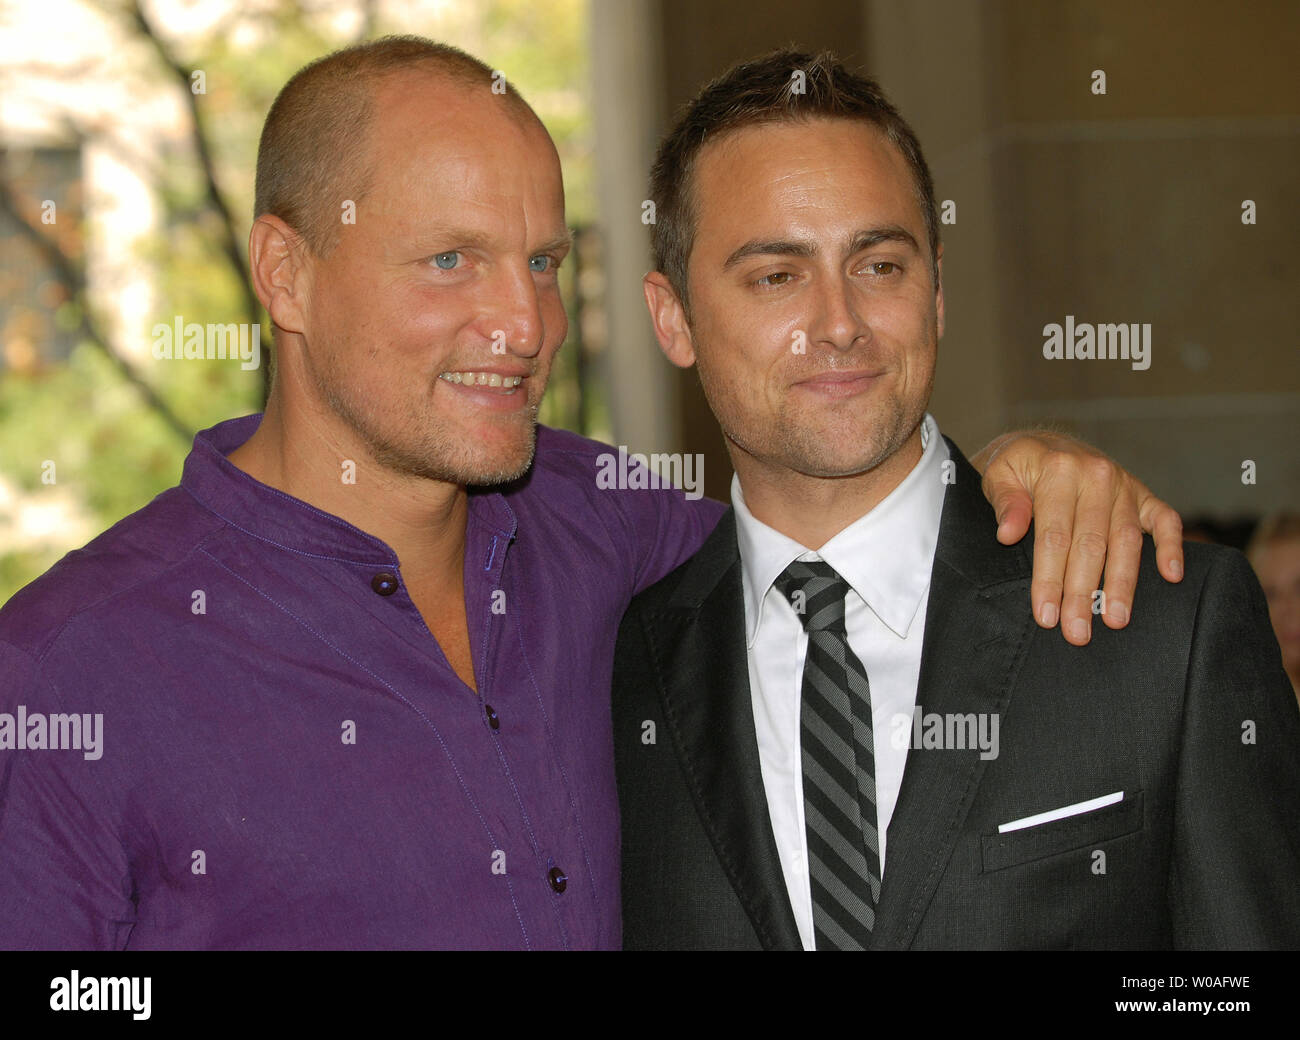 Actor Woody Harrelson (L) and director Stuart Townsend arrive at the Ryerson Theater for the world premiere of 'Battle in Seattle' during the Toronto International Film Festival in Toronto, Canada on September 8, 2007. (UPI Photo/Christine Chew) Stock Photo